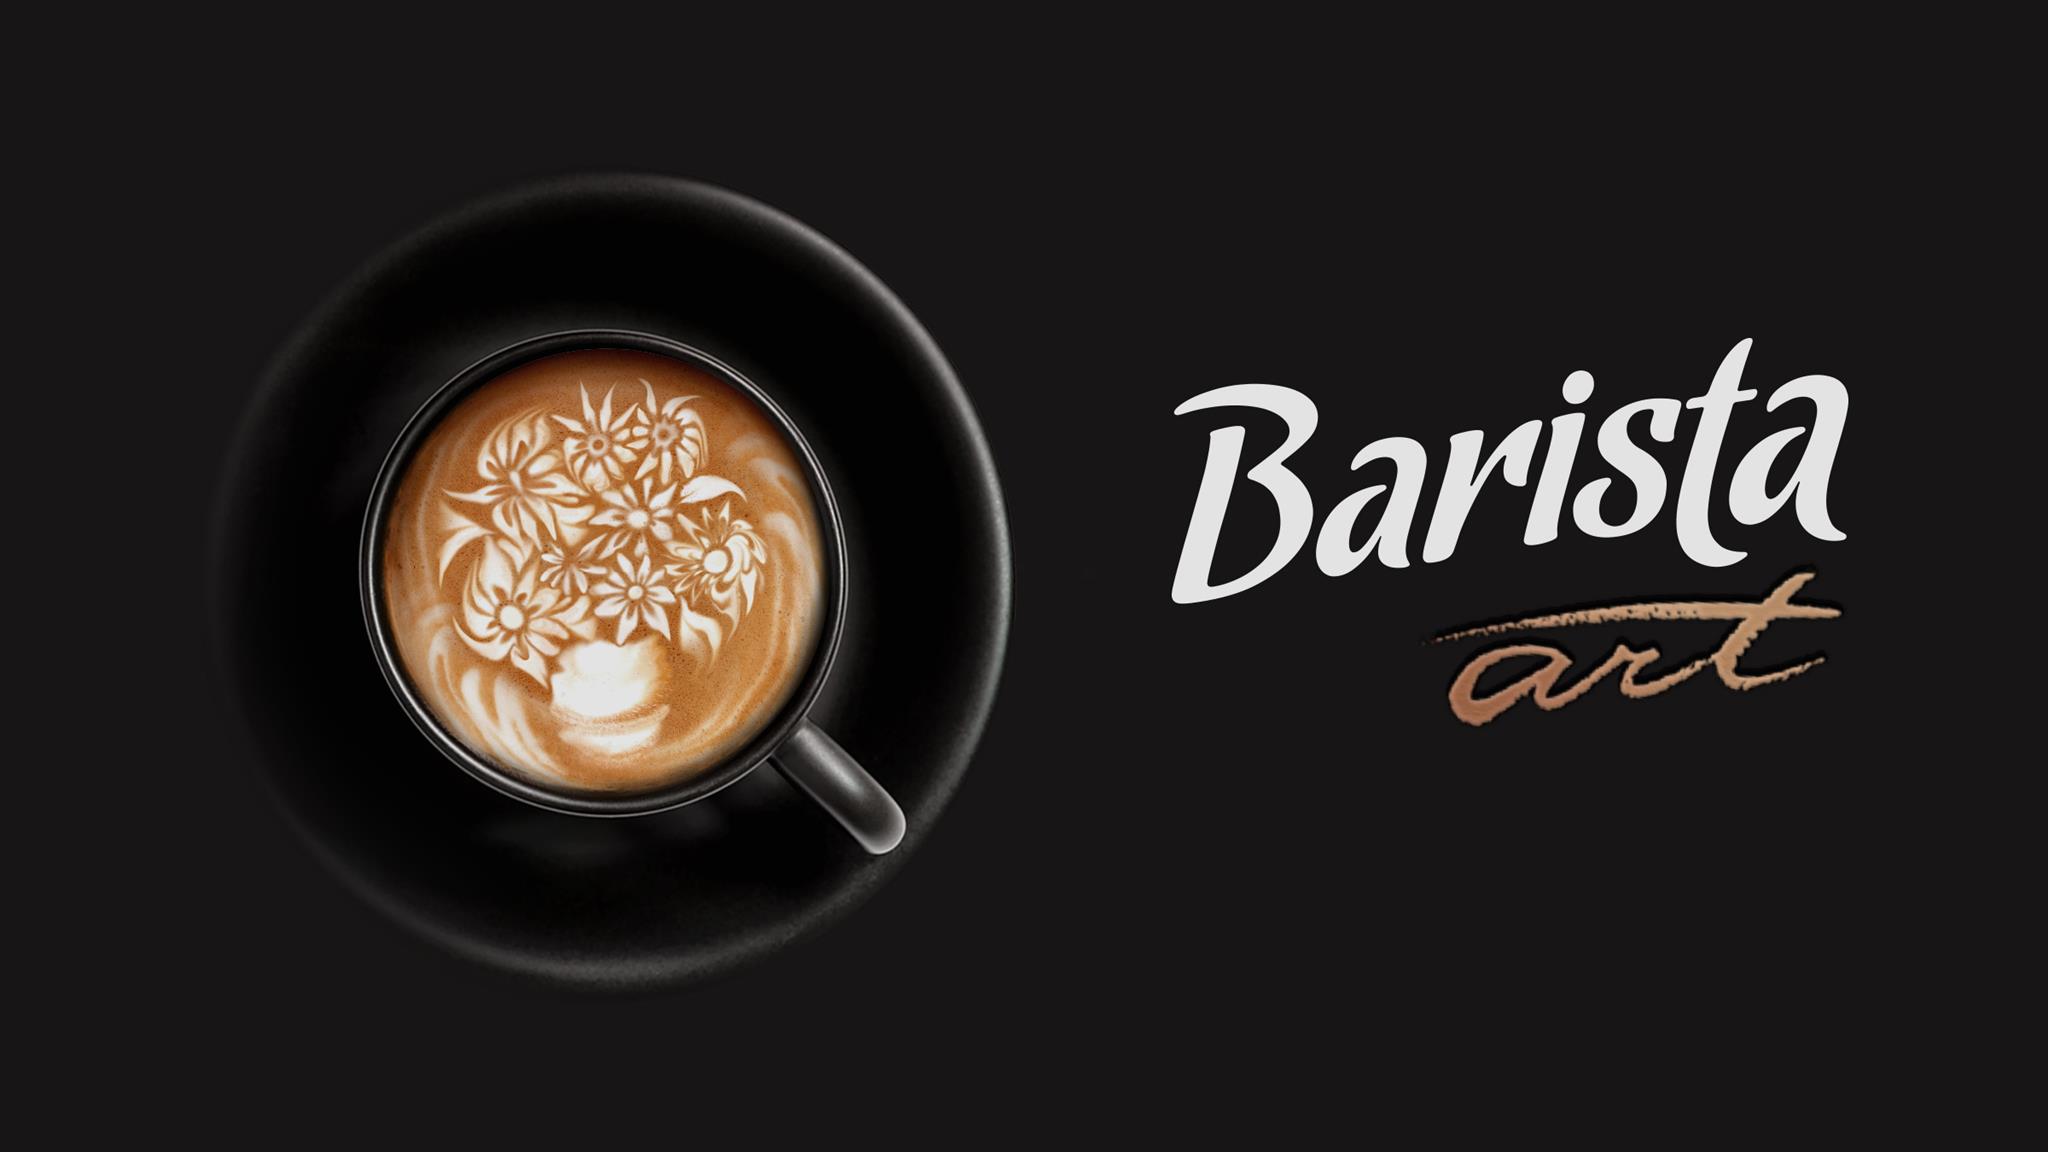 The Mastery of Latte-Art in the Design of Coffee Packaging